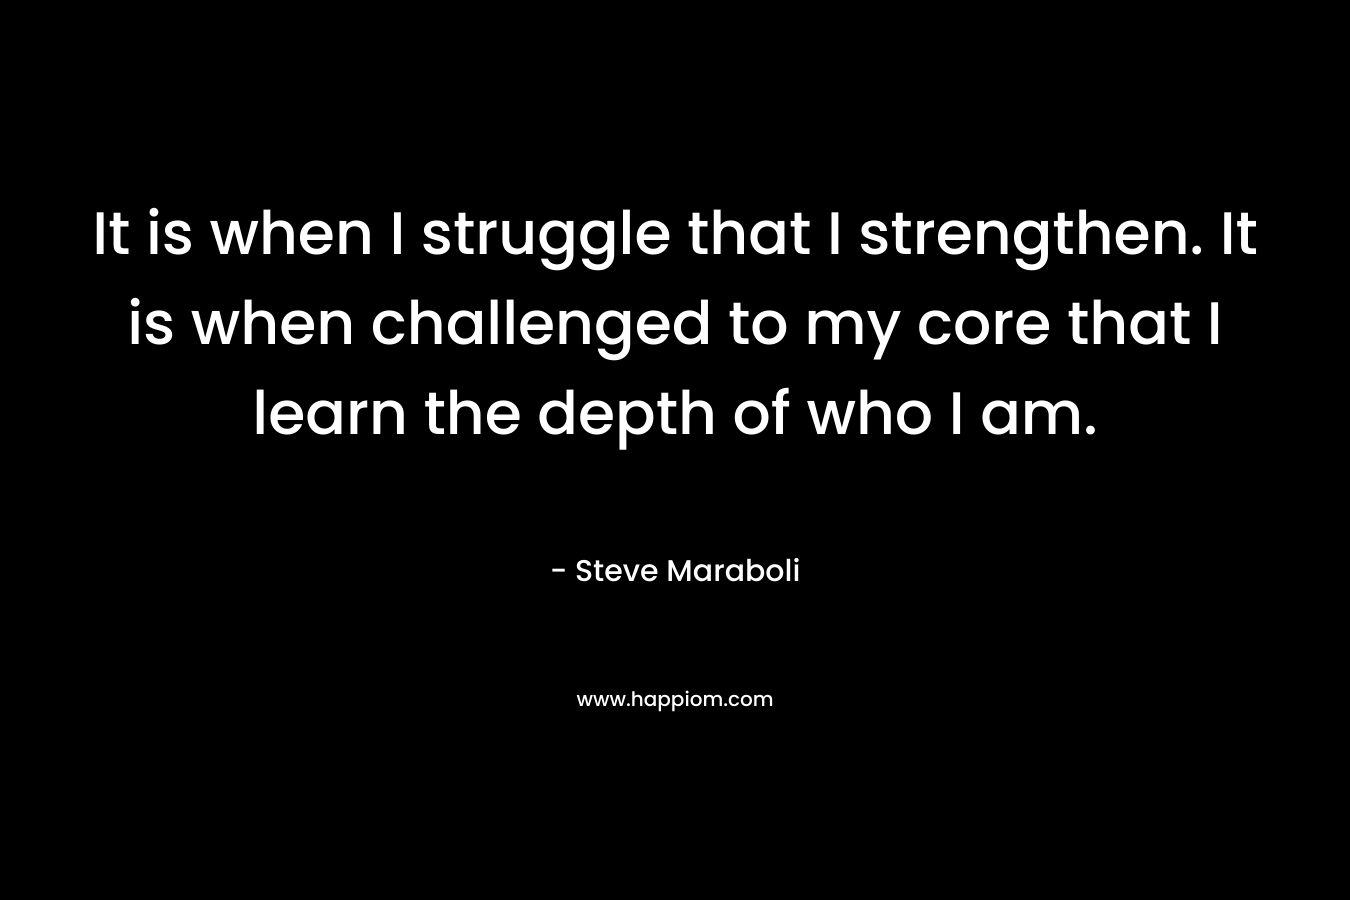 It is when I struggle that I strengthen. It is when challenged to my core that I learn the depth of who I am. – Steve Maraboli